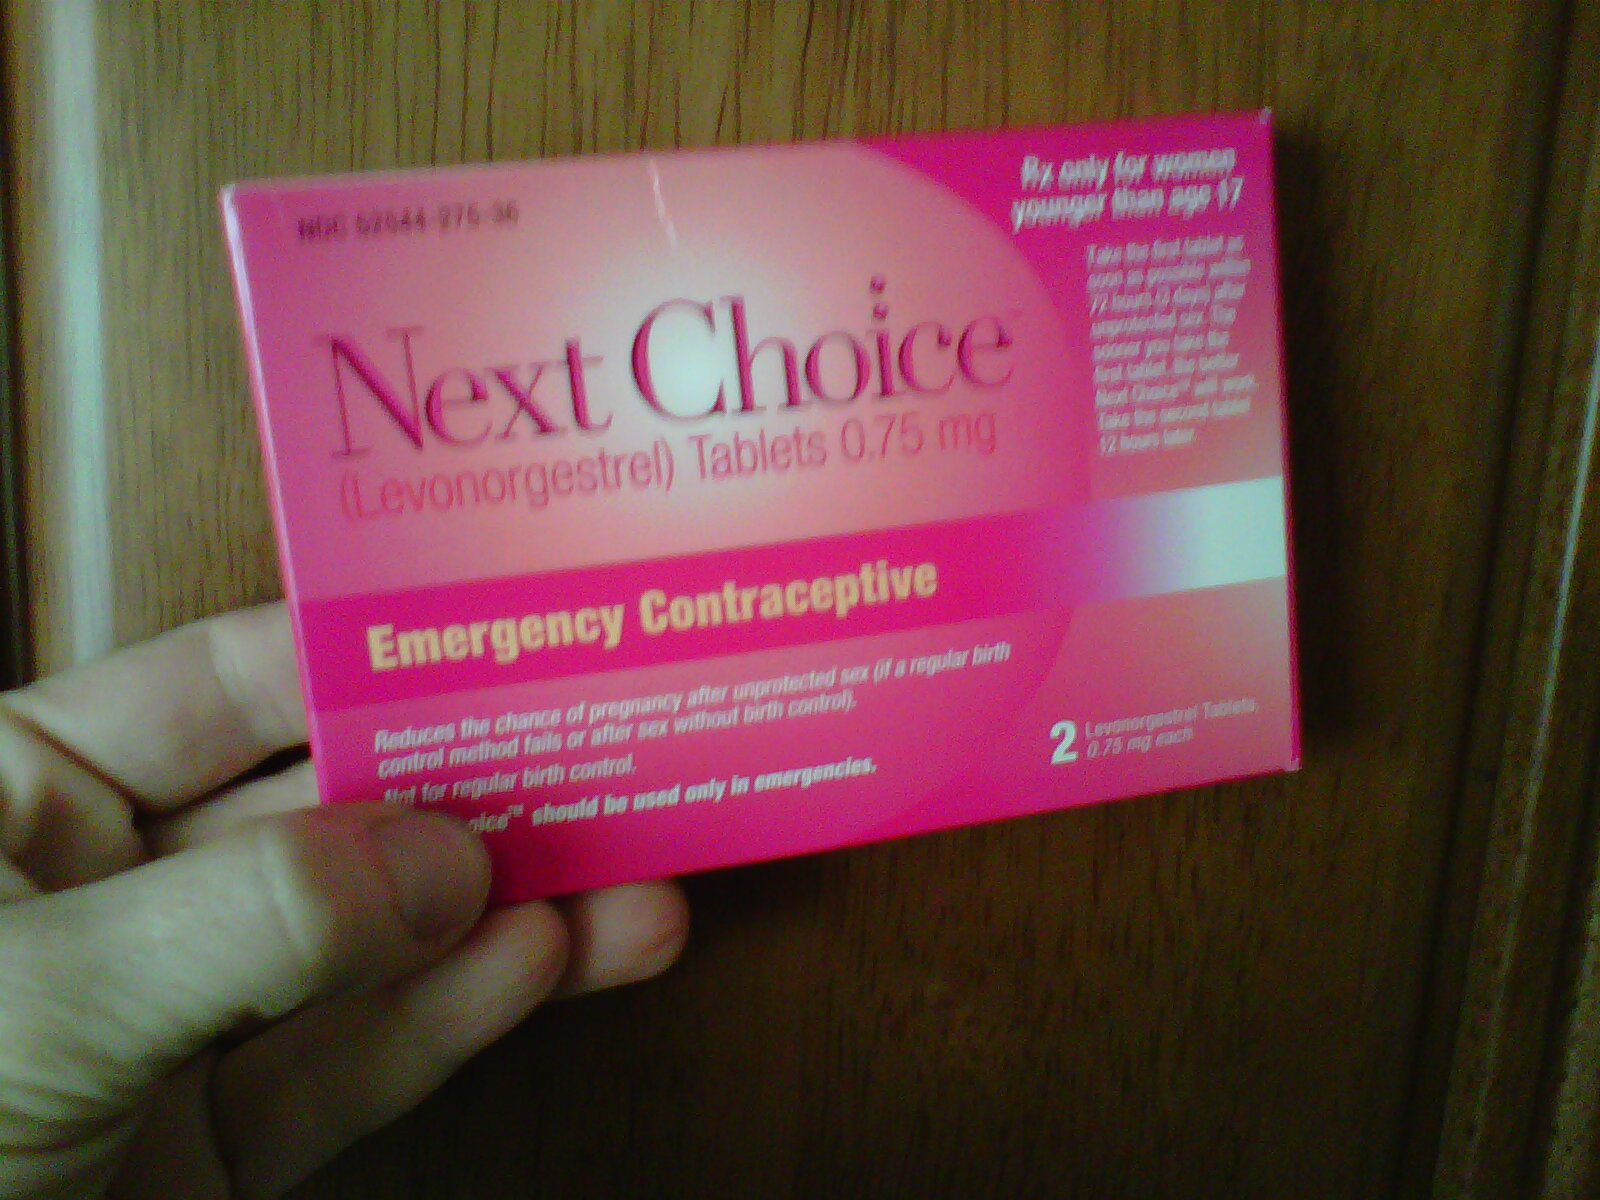 homesick home: Emergency contraception has stirred up some interesting ...